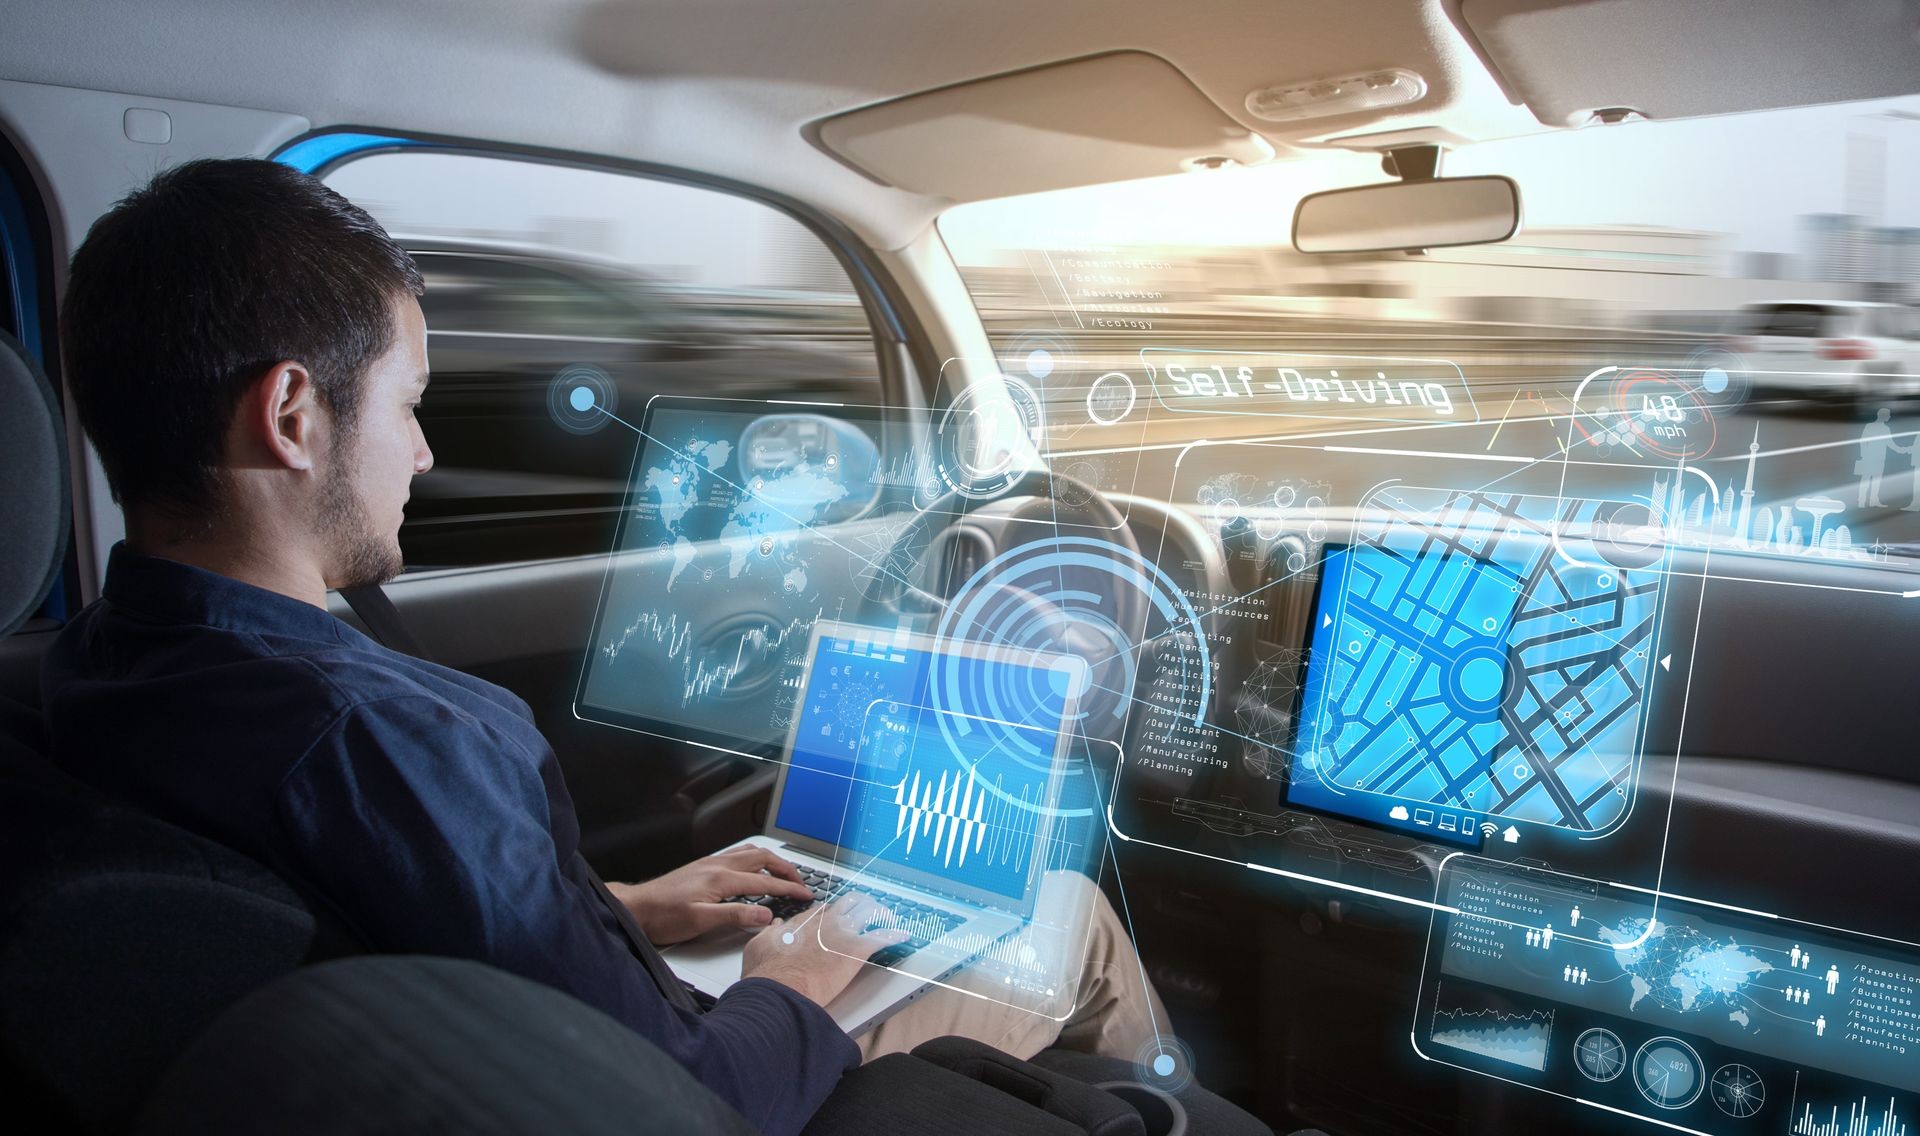 Connected Vehicle & IoT Services